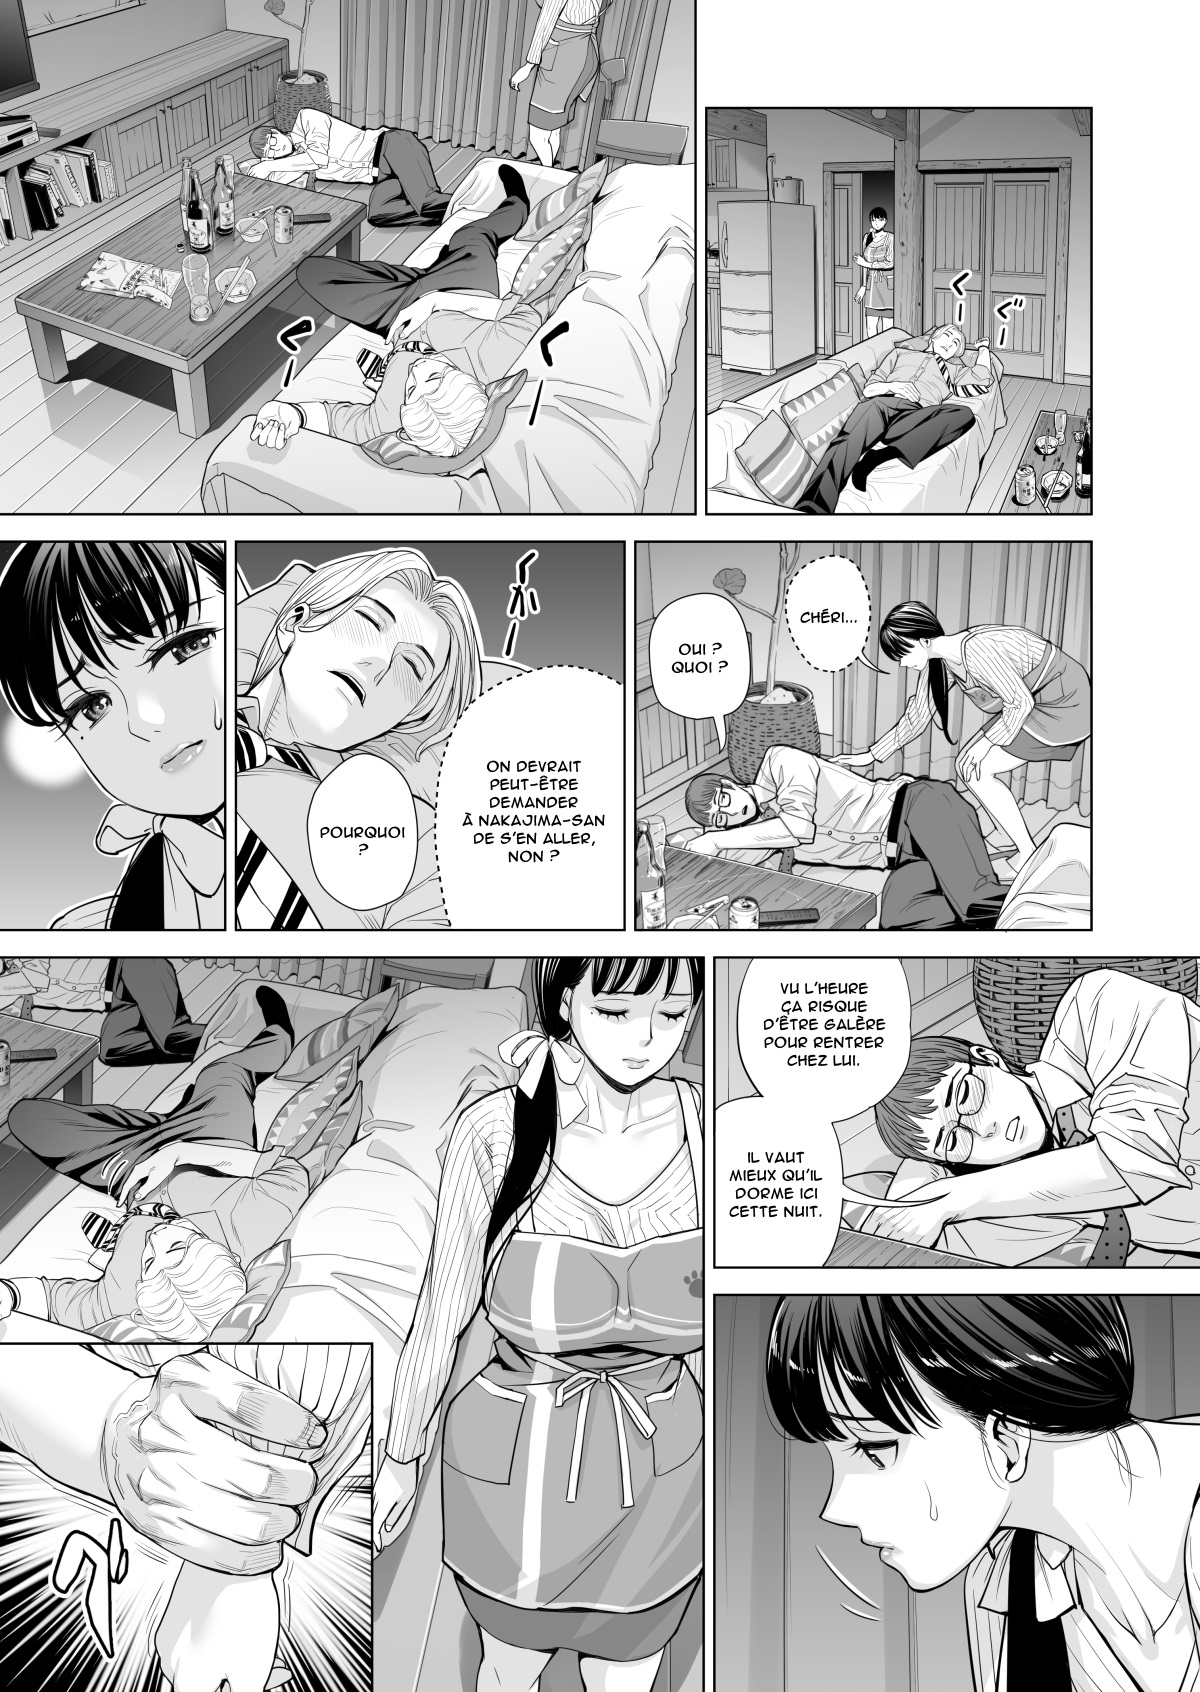 Tsukiyo no Midare Zake  Moonlit Intoxication ~ A Housewife Stolen by a Coworker Besides her Blackout Drunk Husband ~ Chapter 1 numero d'image 37